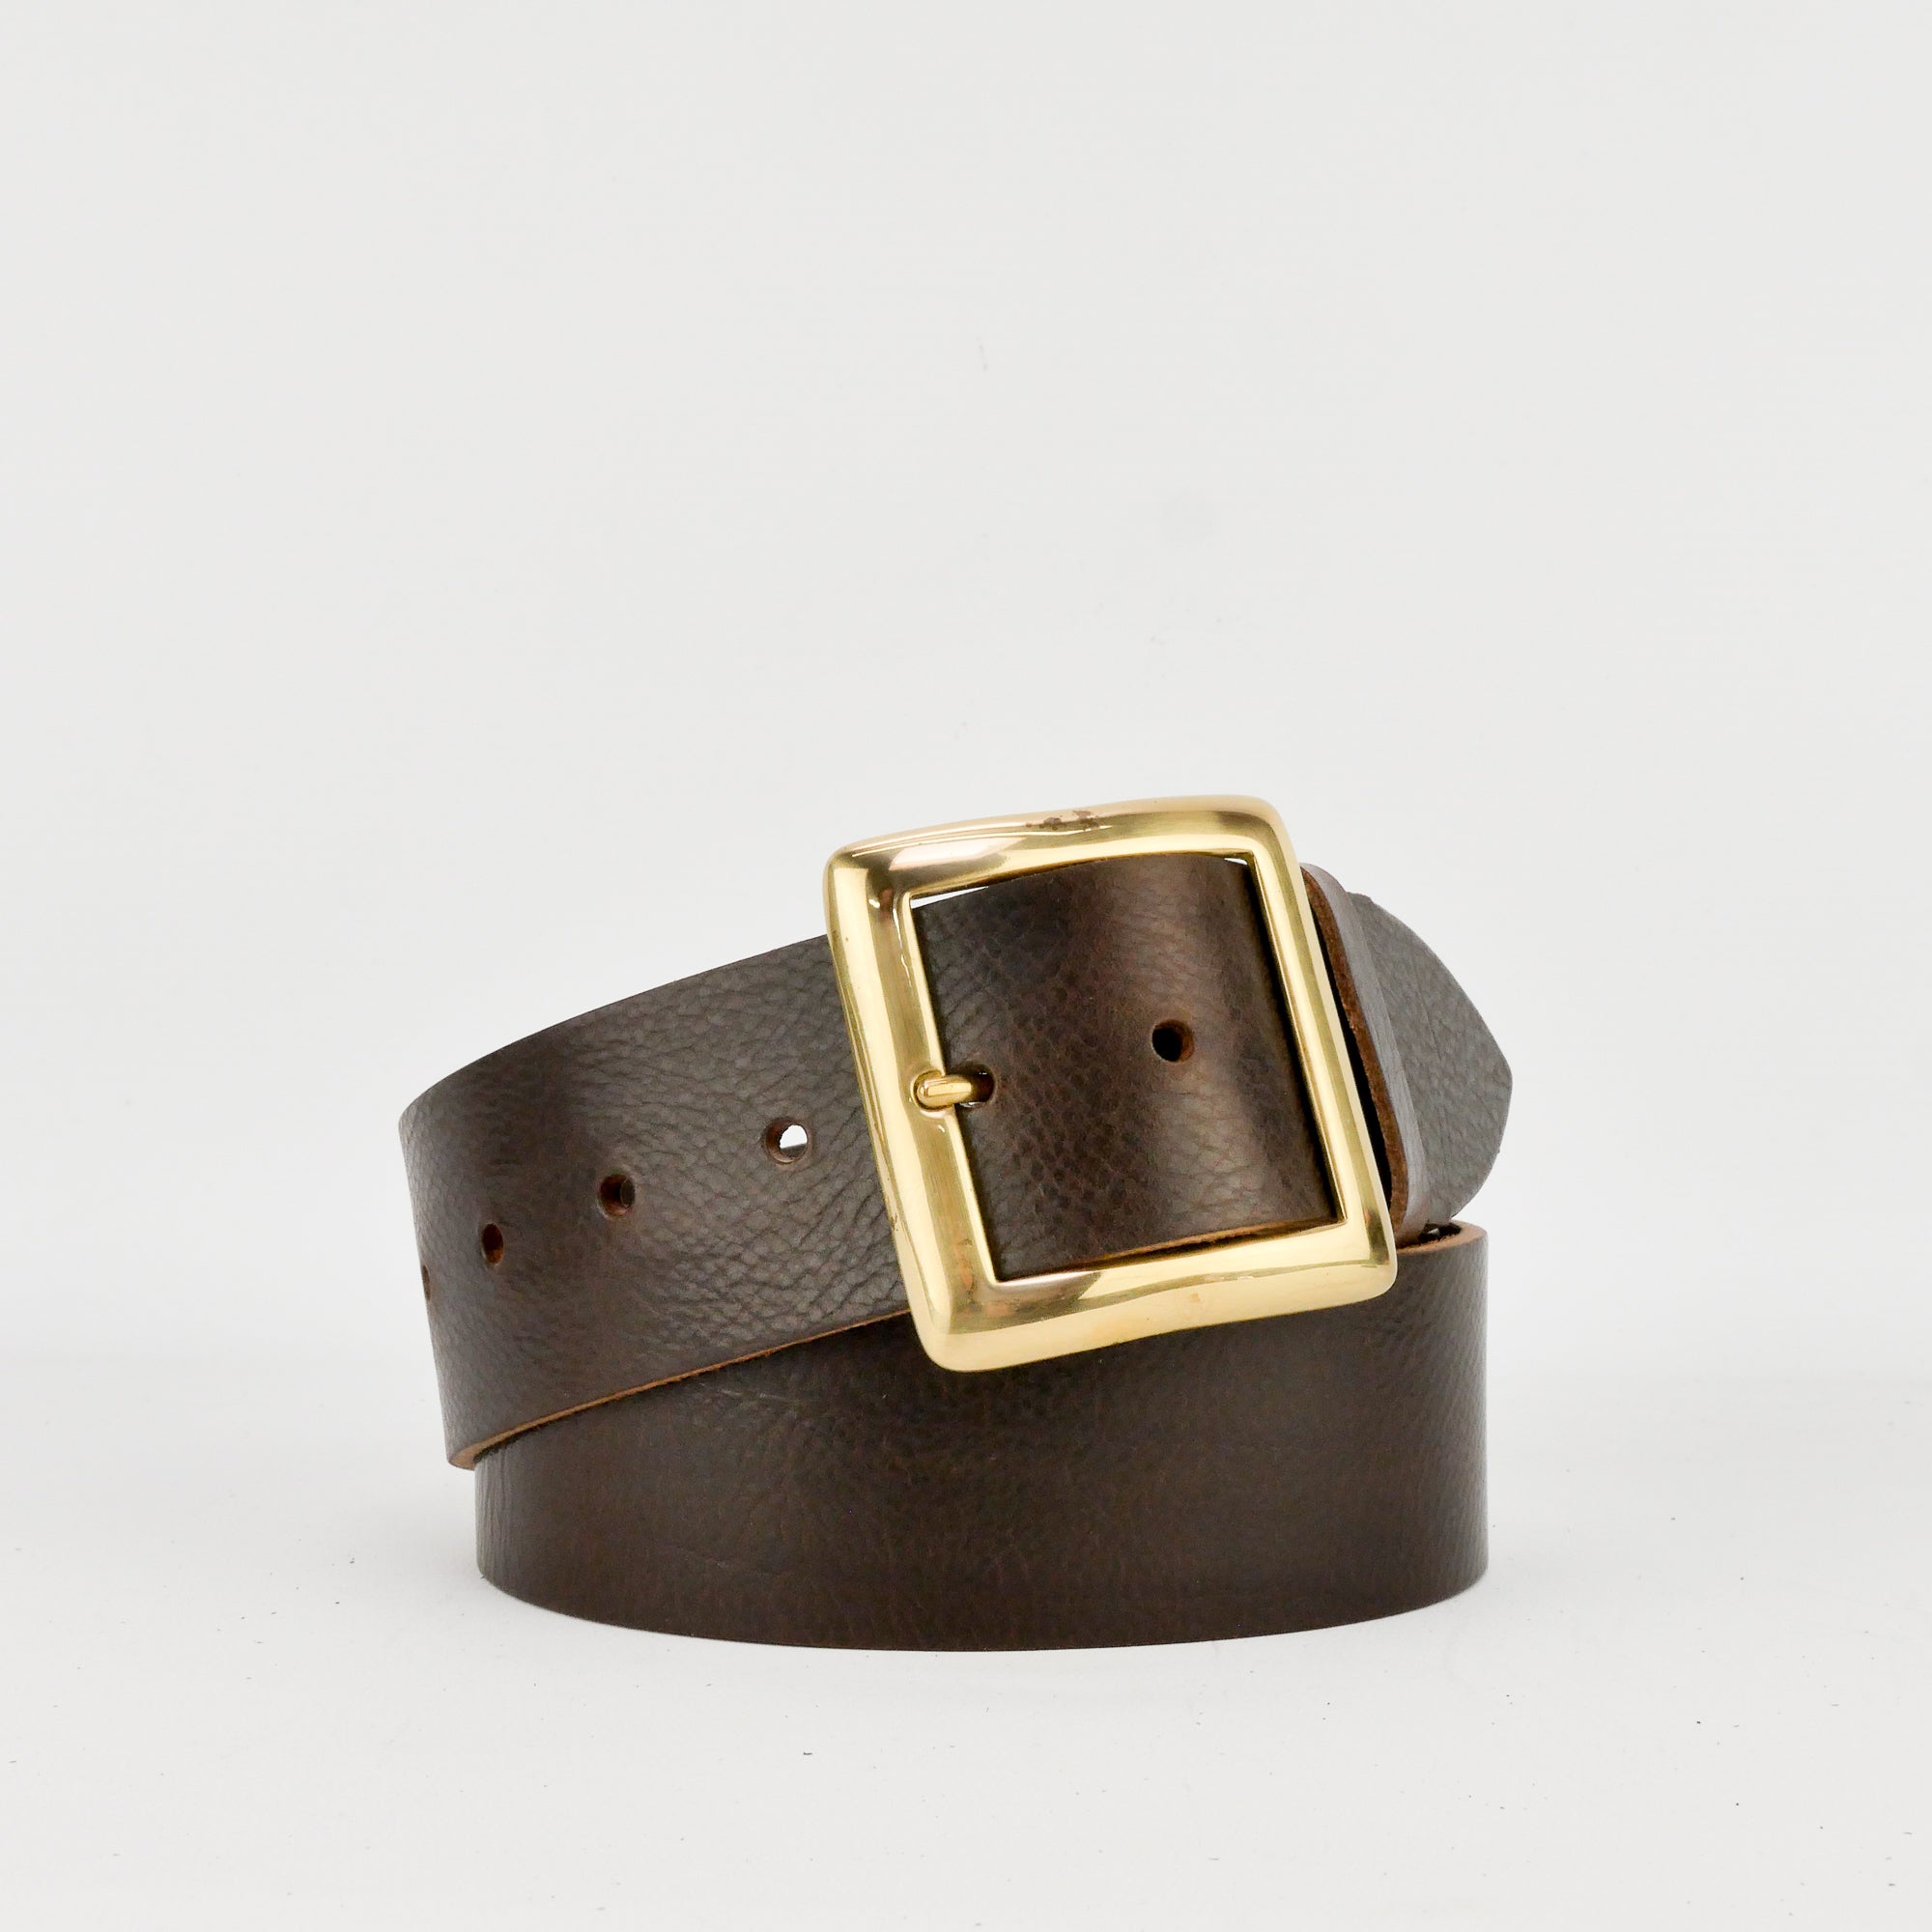 2" Buckle Squared